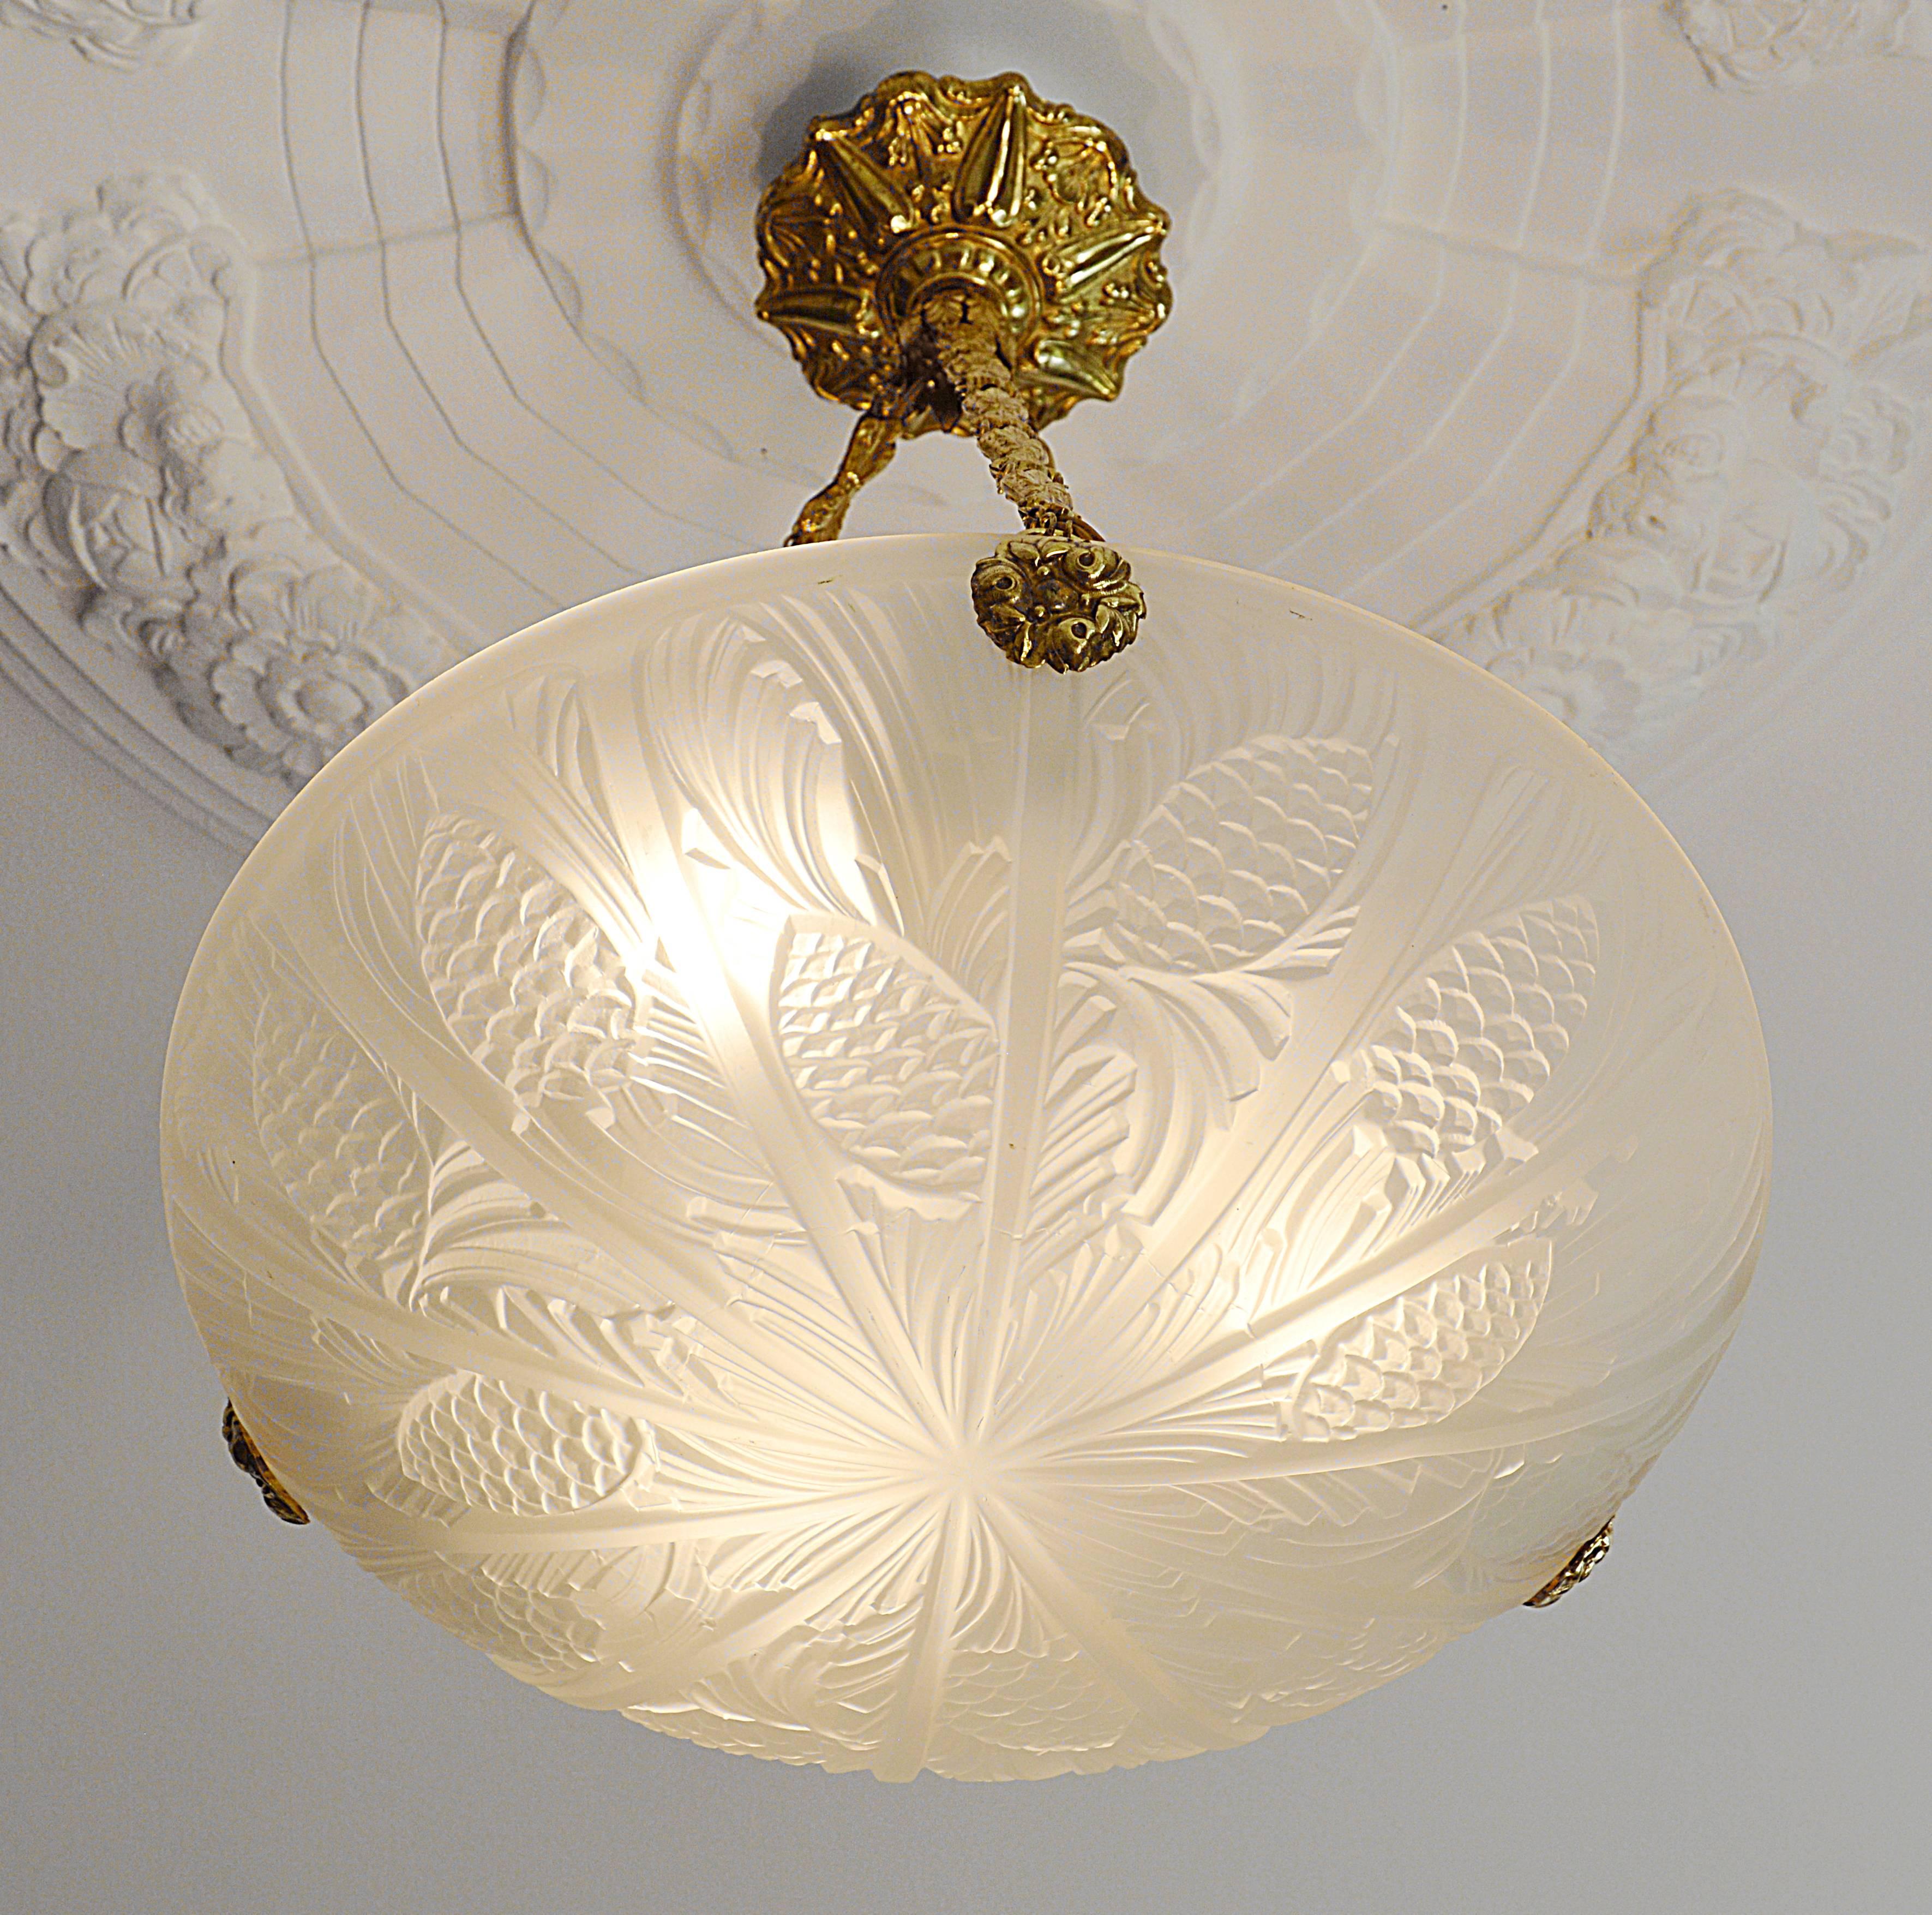 French Art Deco pendant chandelier by Daniel Drancourt, seven rue Bleue, Paris, France, 1929. White frosted molded glass shade with a pine-cone pattern. Old and genuine brass and embossed metal fixture. Can be compared with the Muller Freres,